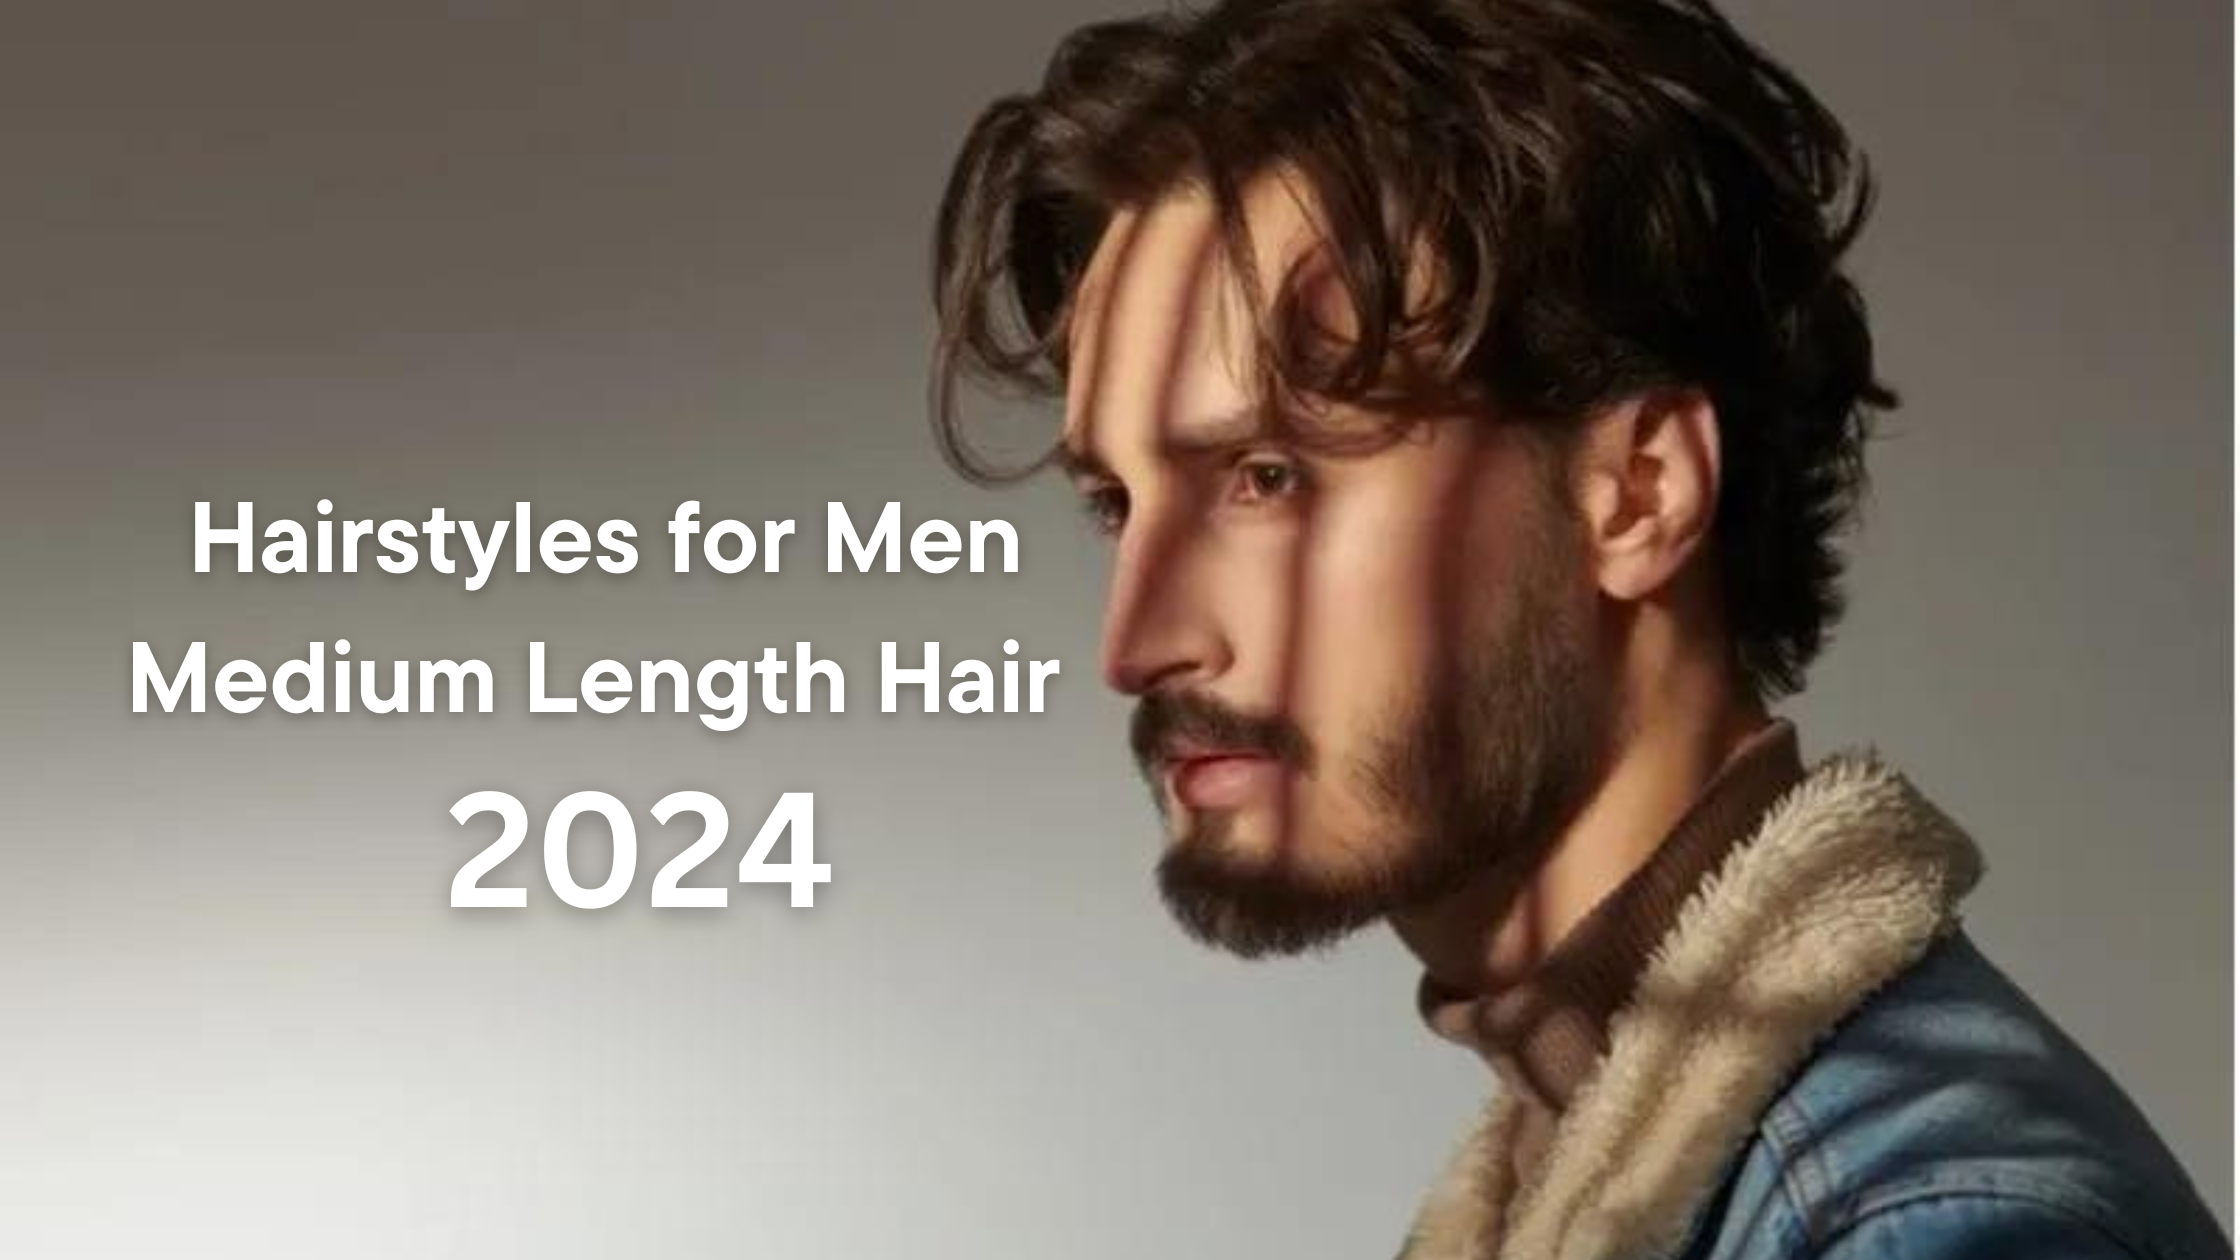 5 Low Maintenance Summer Hairstyles for Men